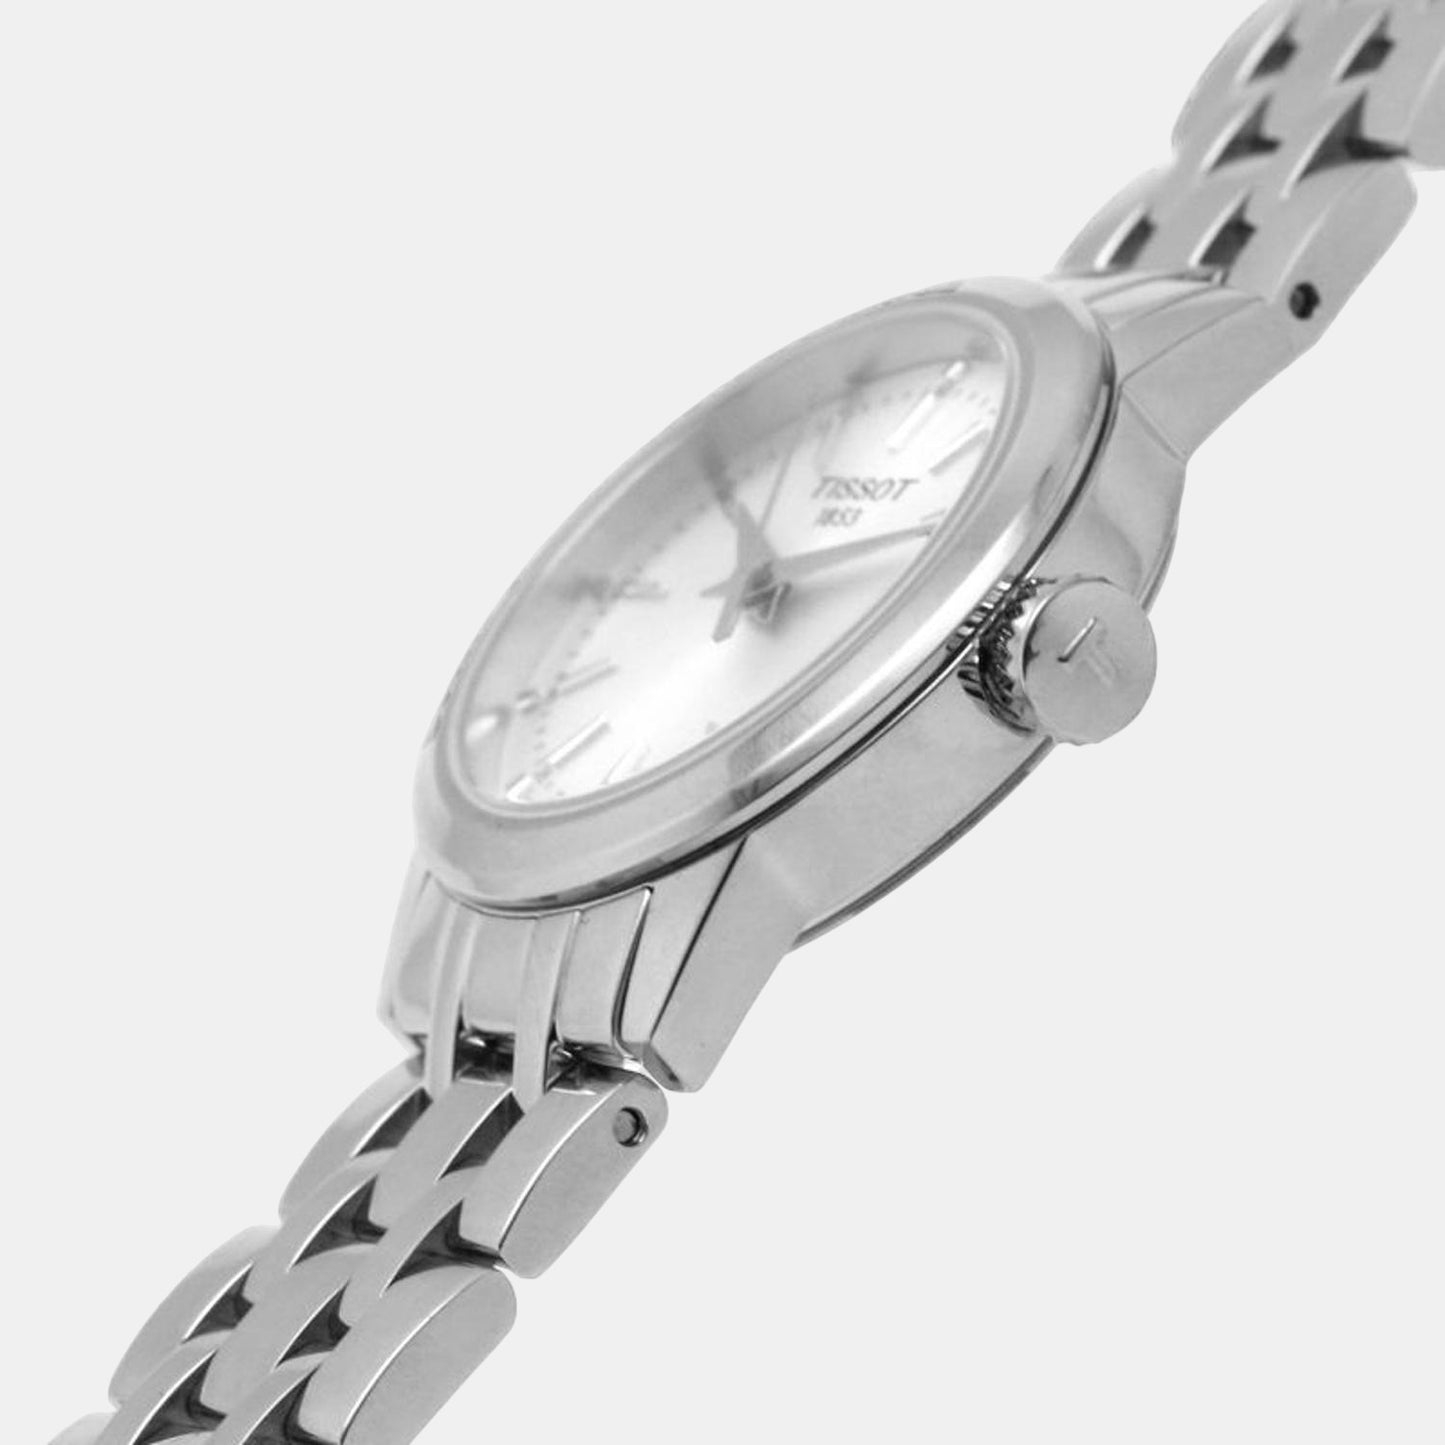 tissot-stainless-steel-silver-analog-female-watch-t1292101103100